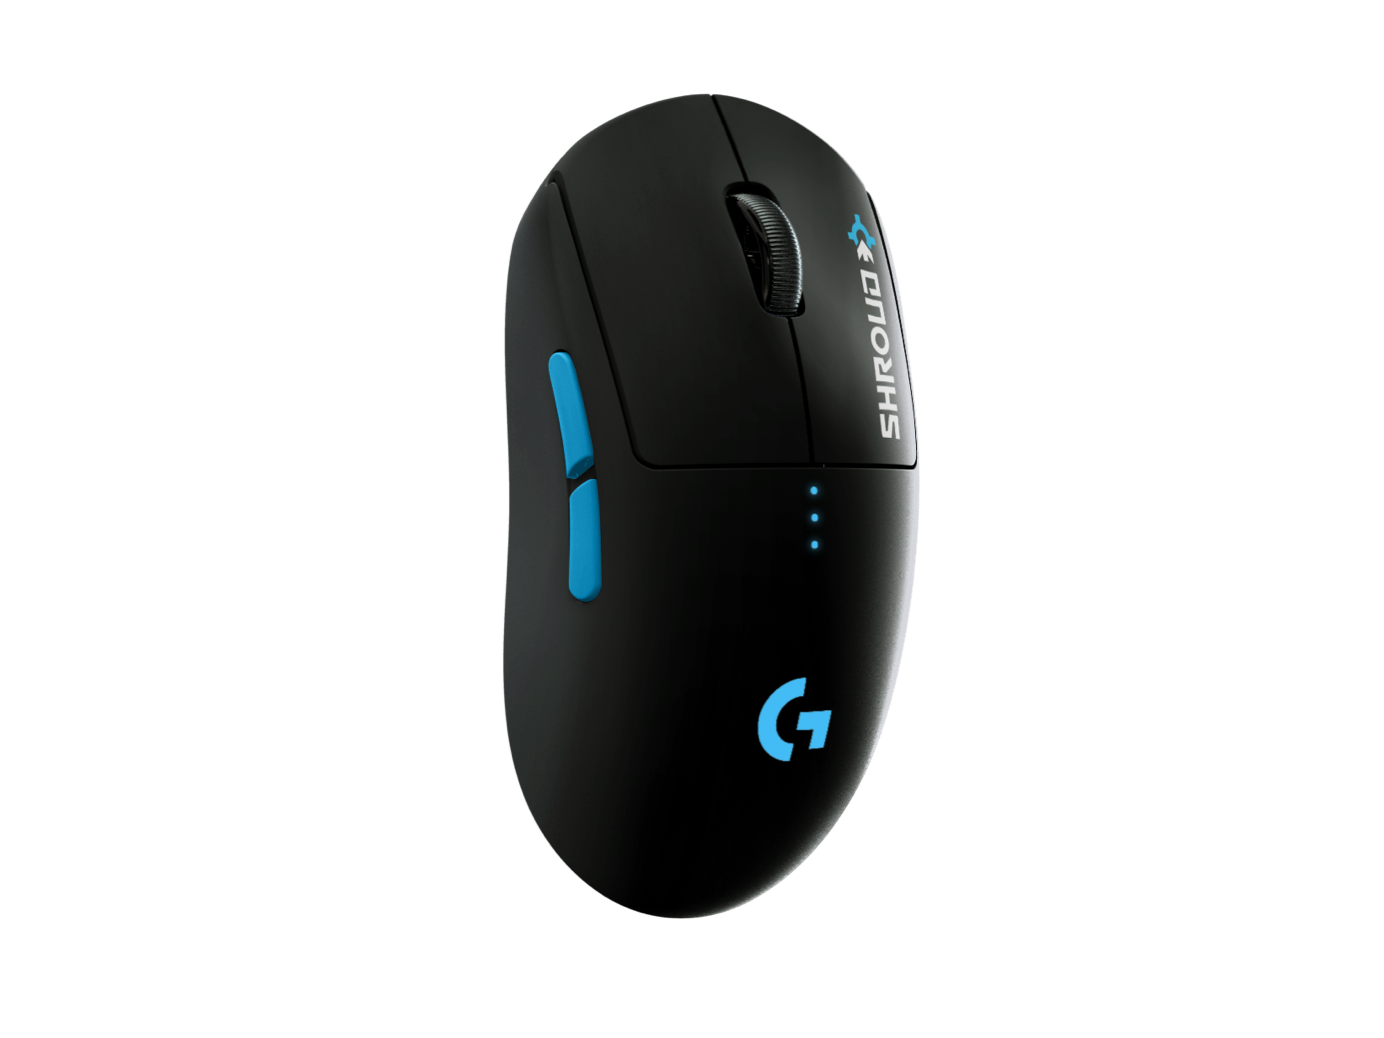 PRO Kabellose Gaming-Maus - Shroud Two Year Extended Warranty von Logitech G